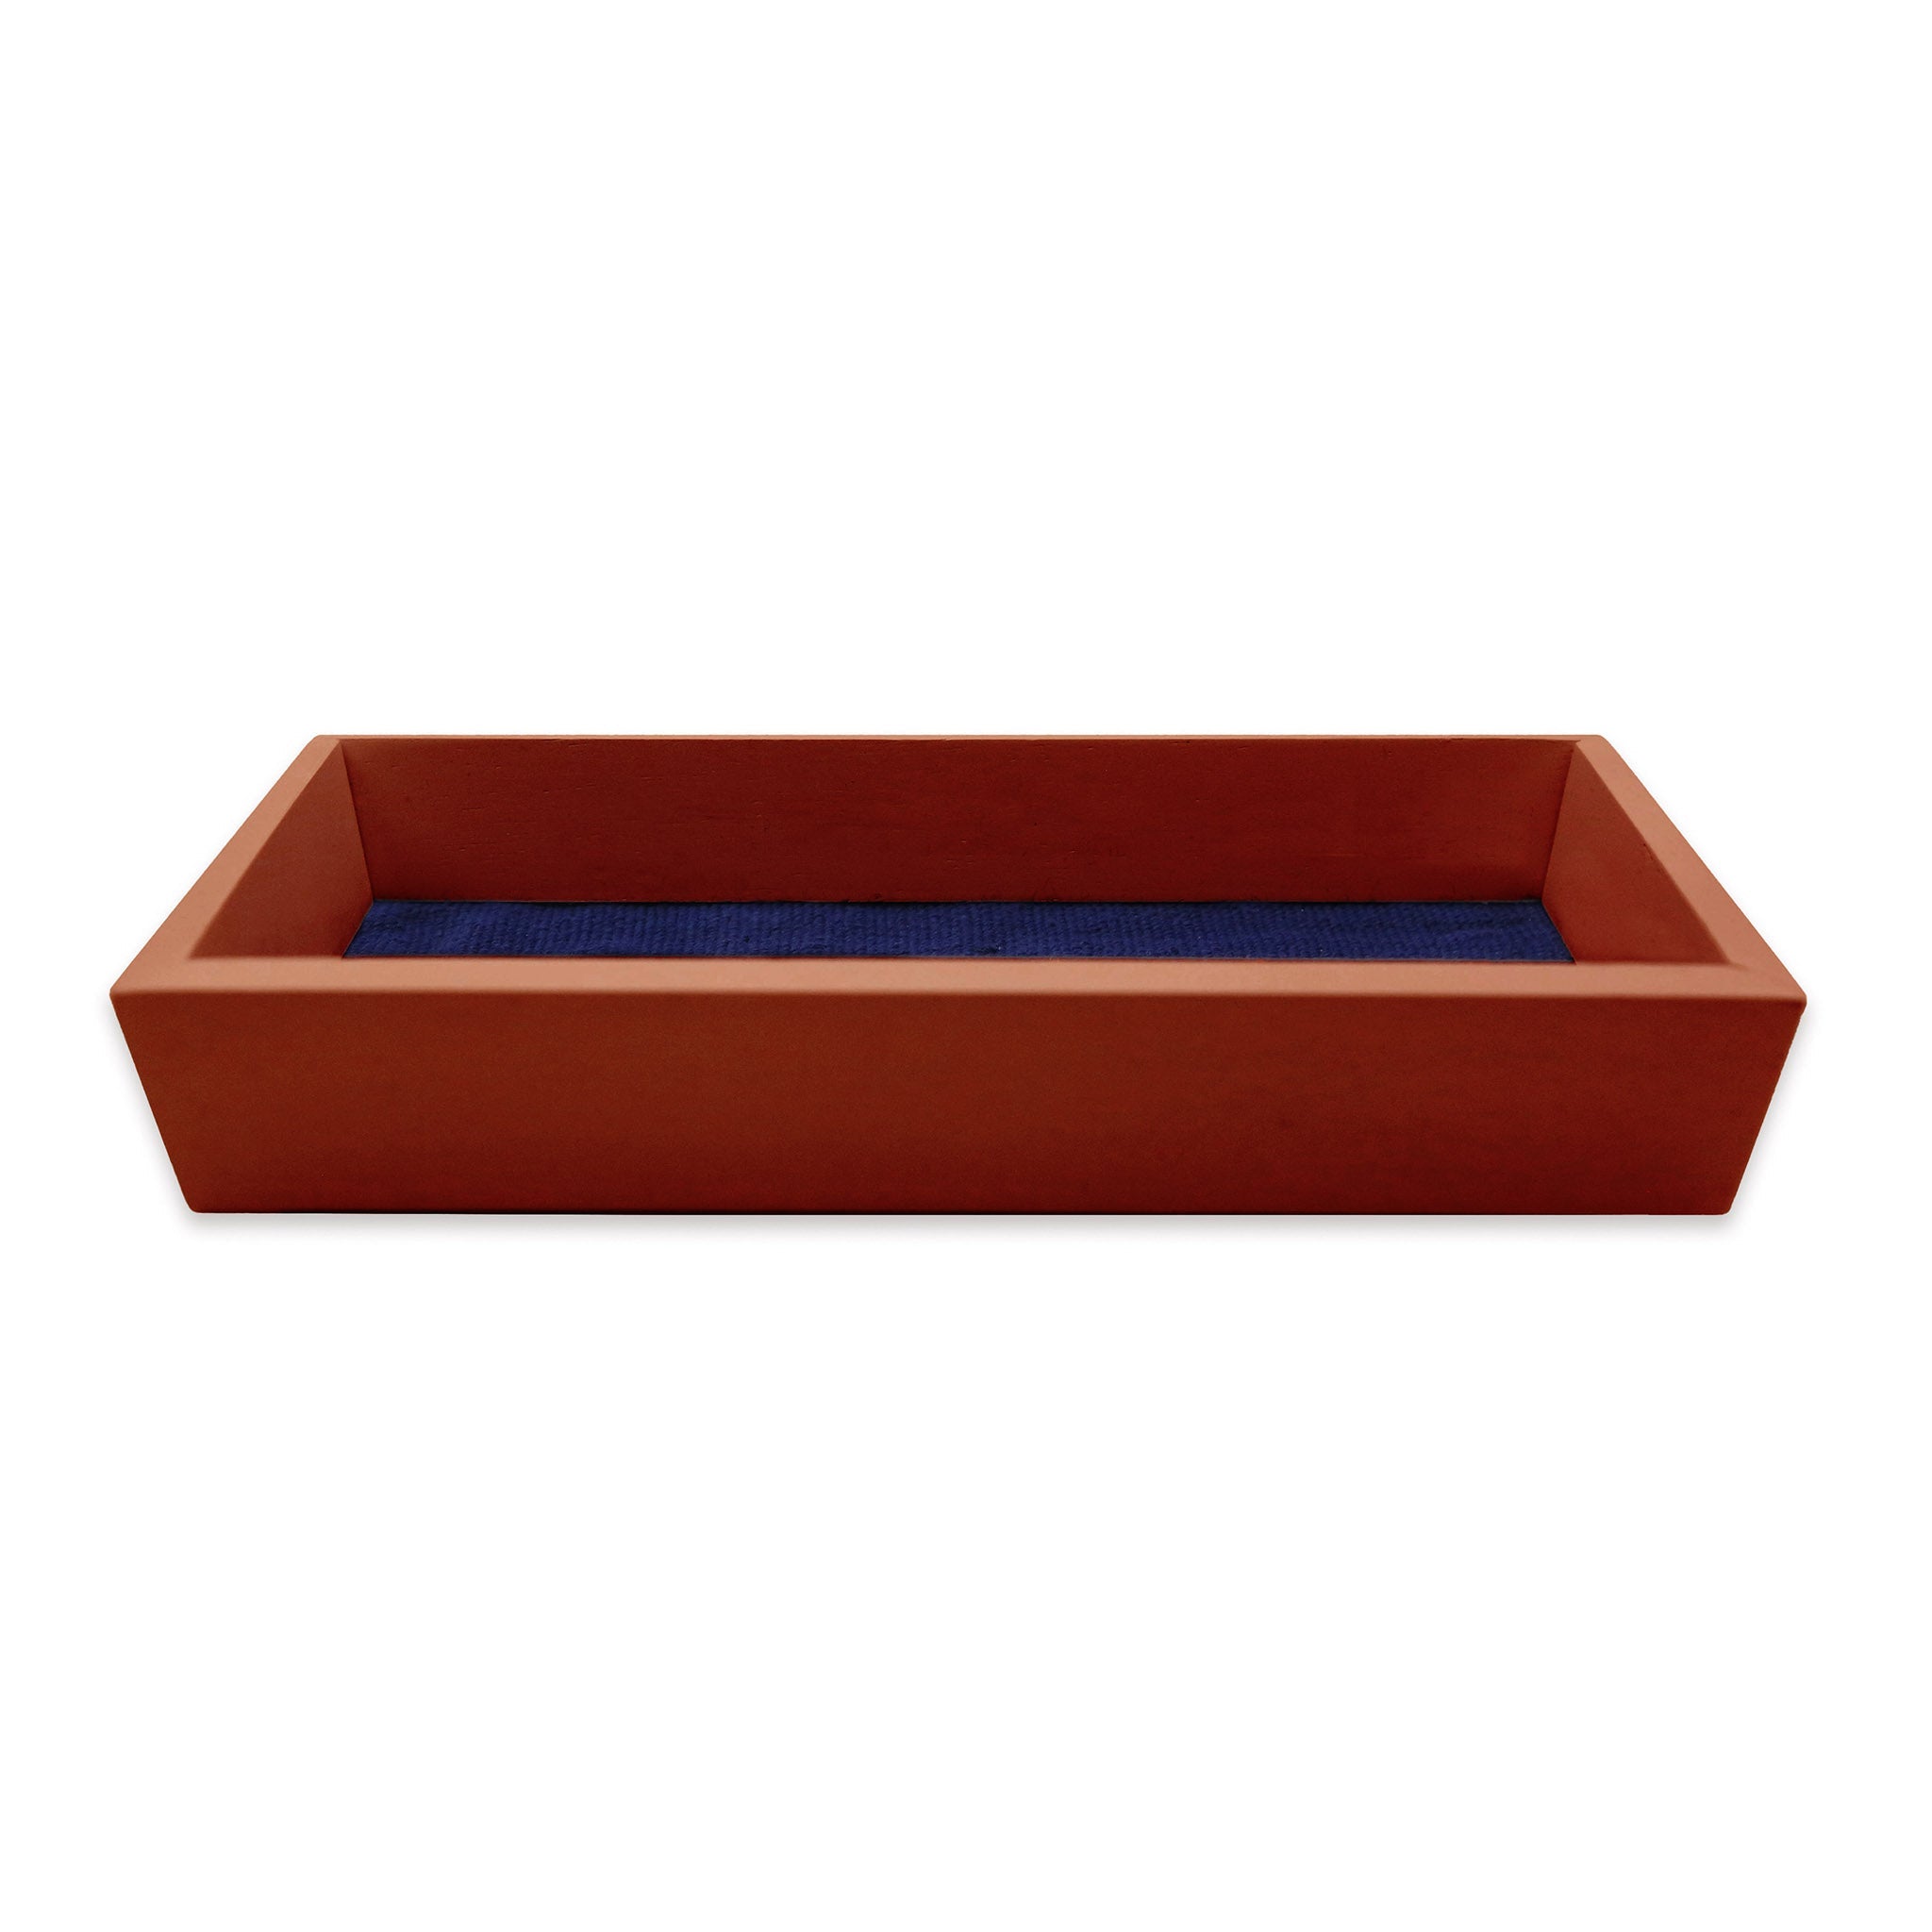 Notre Dame ND Valet Tray (Classic Navy) (Chestnut Wood)